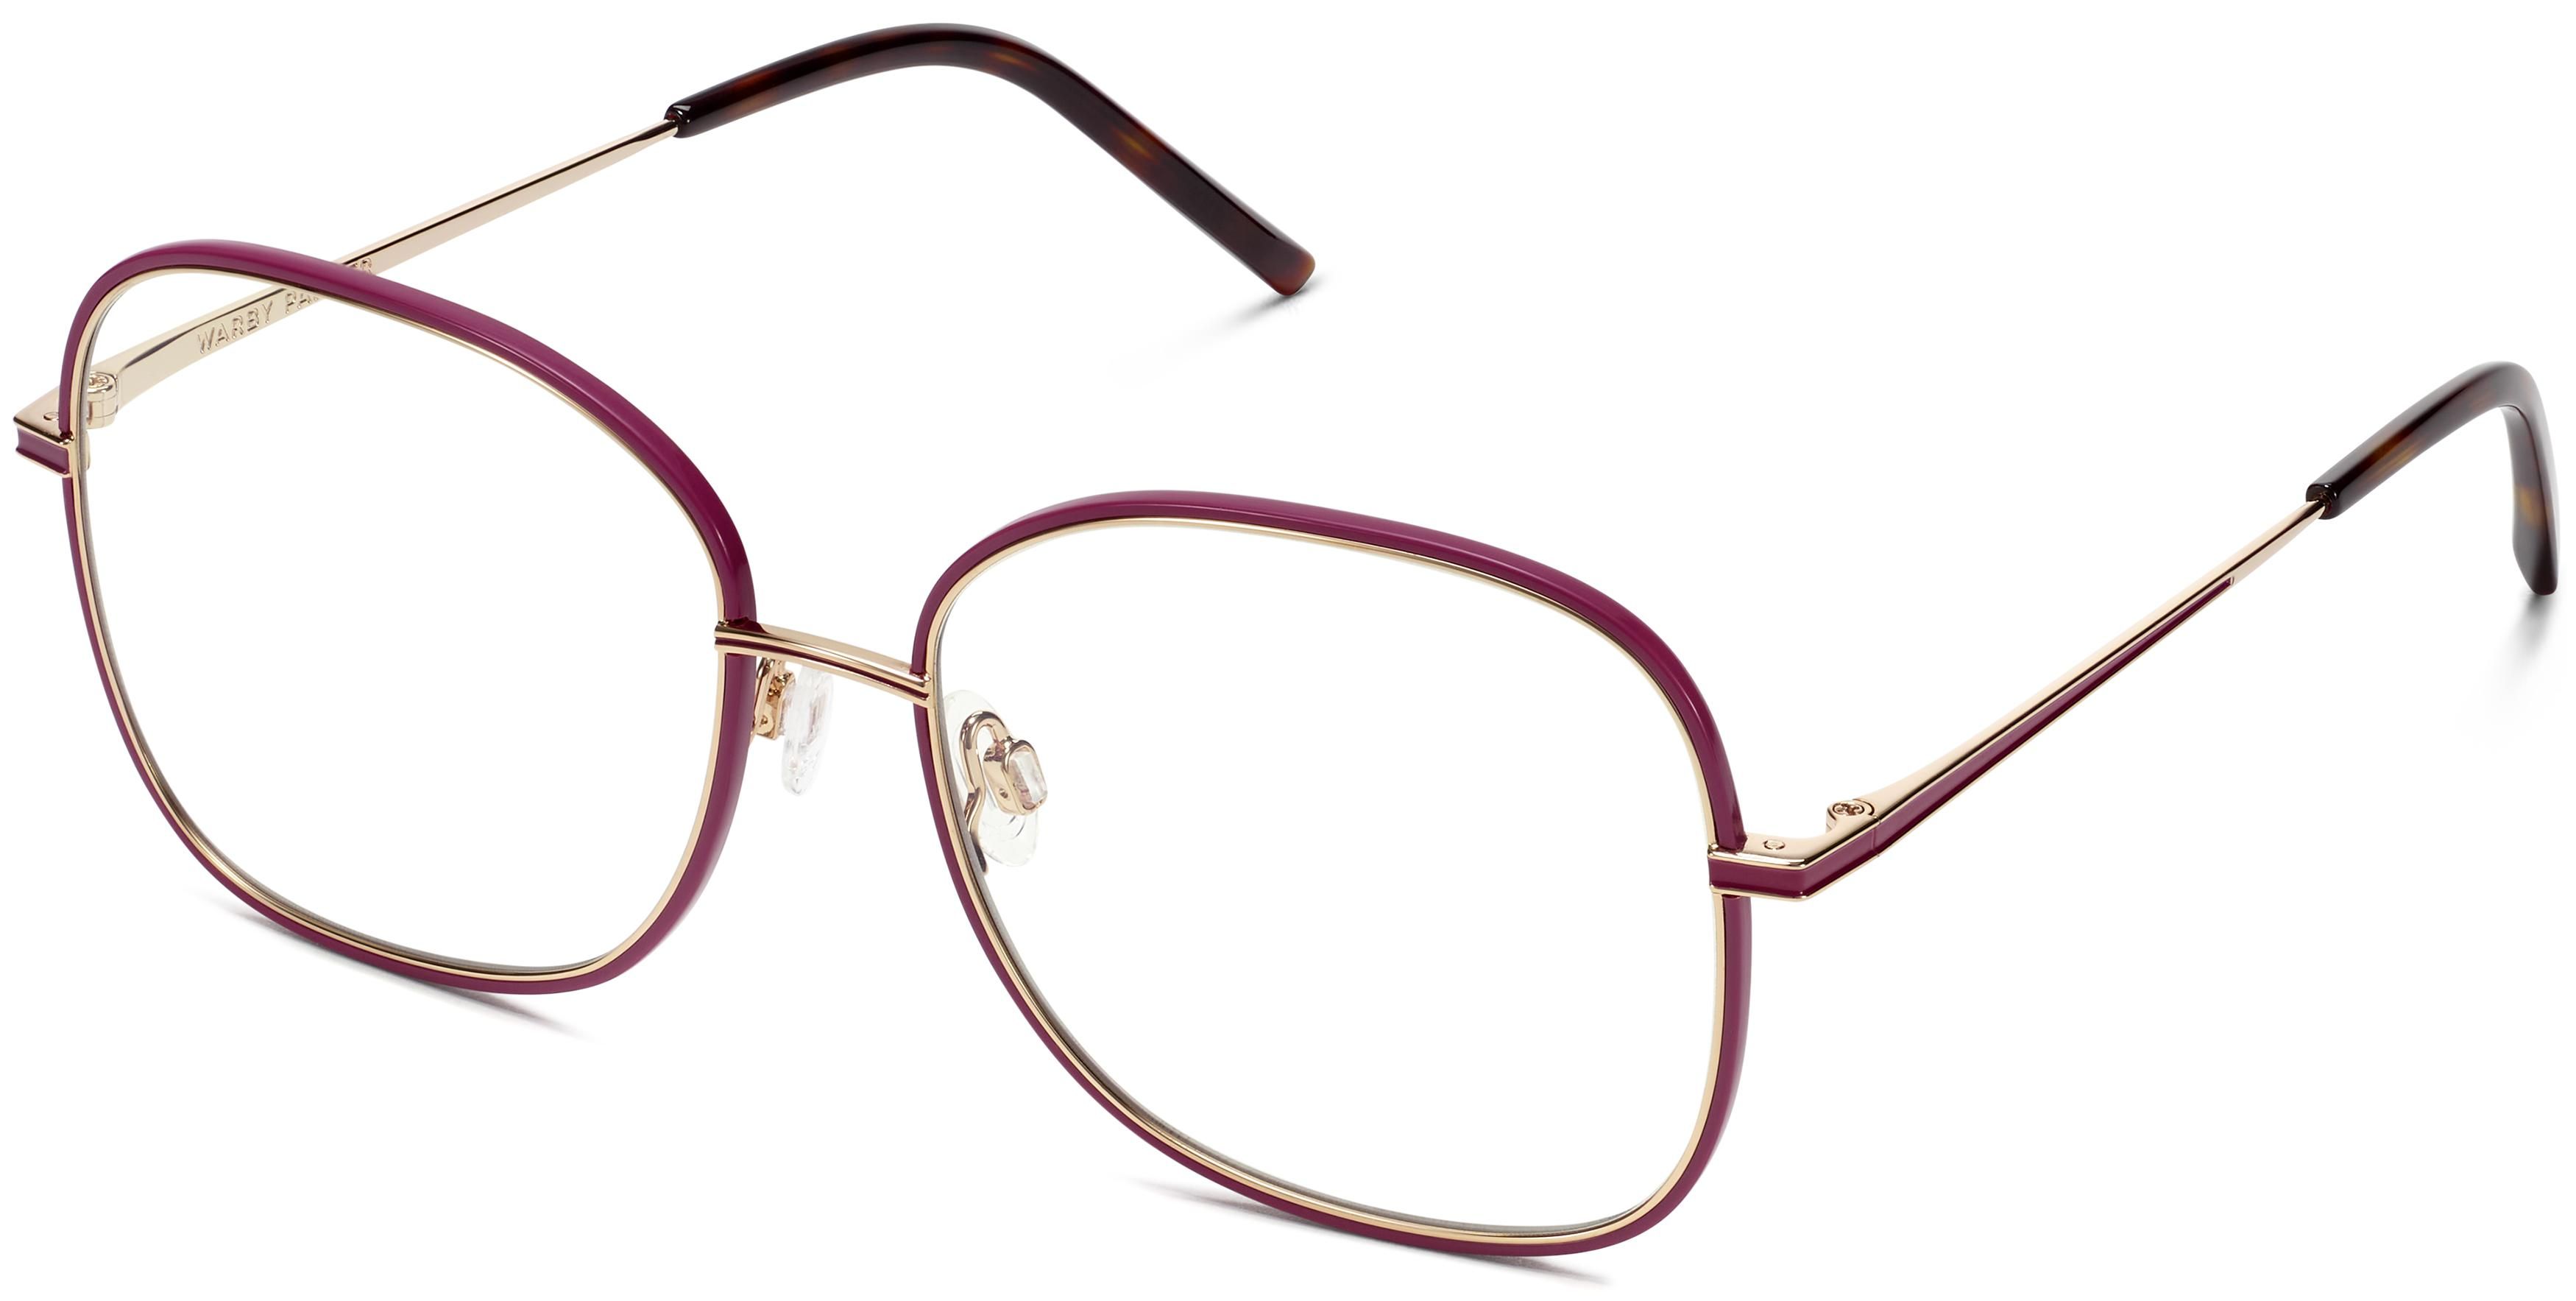 Leah Eyeglasses in Rose Apple with Polished Gold | Warby Parker | Warby Parker (US)